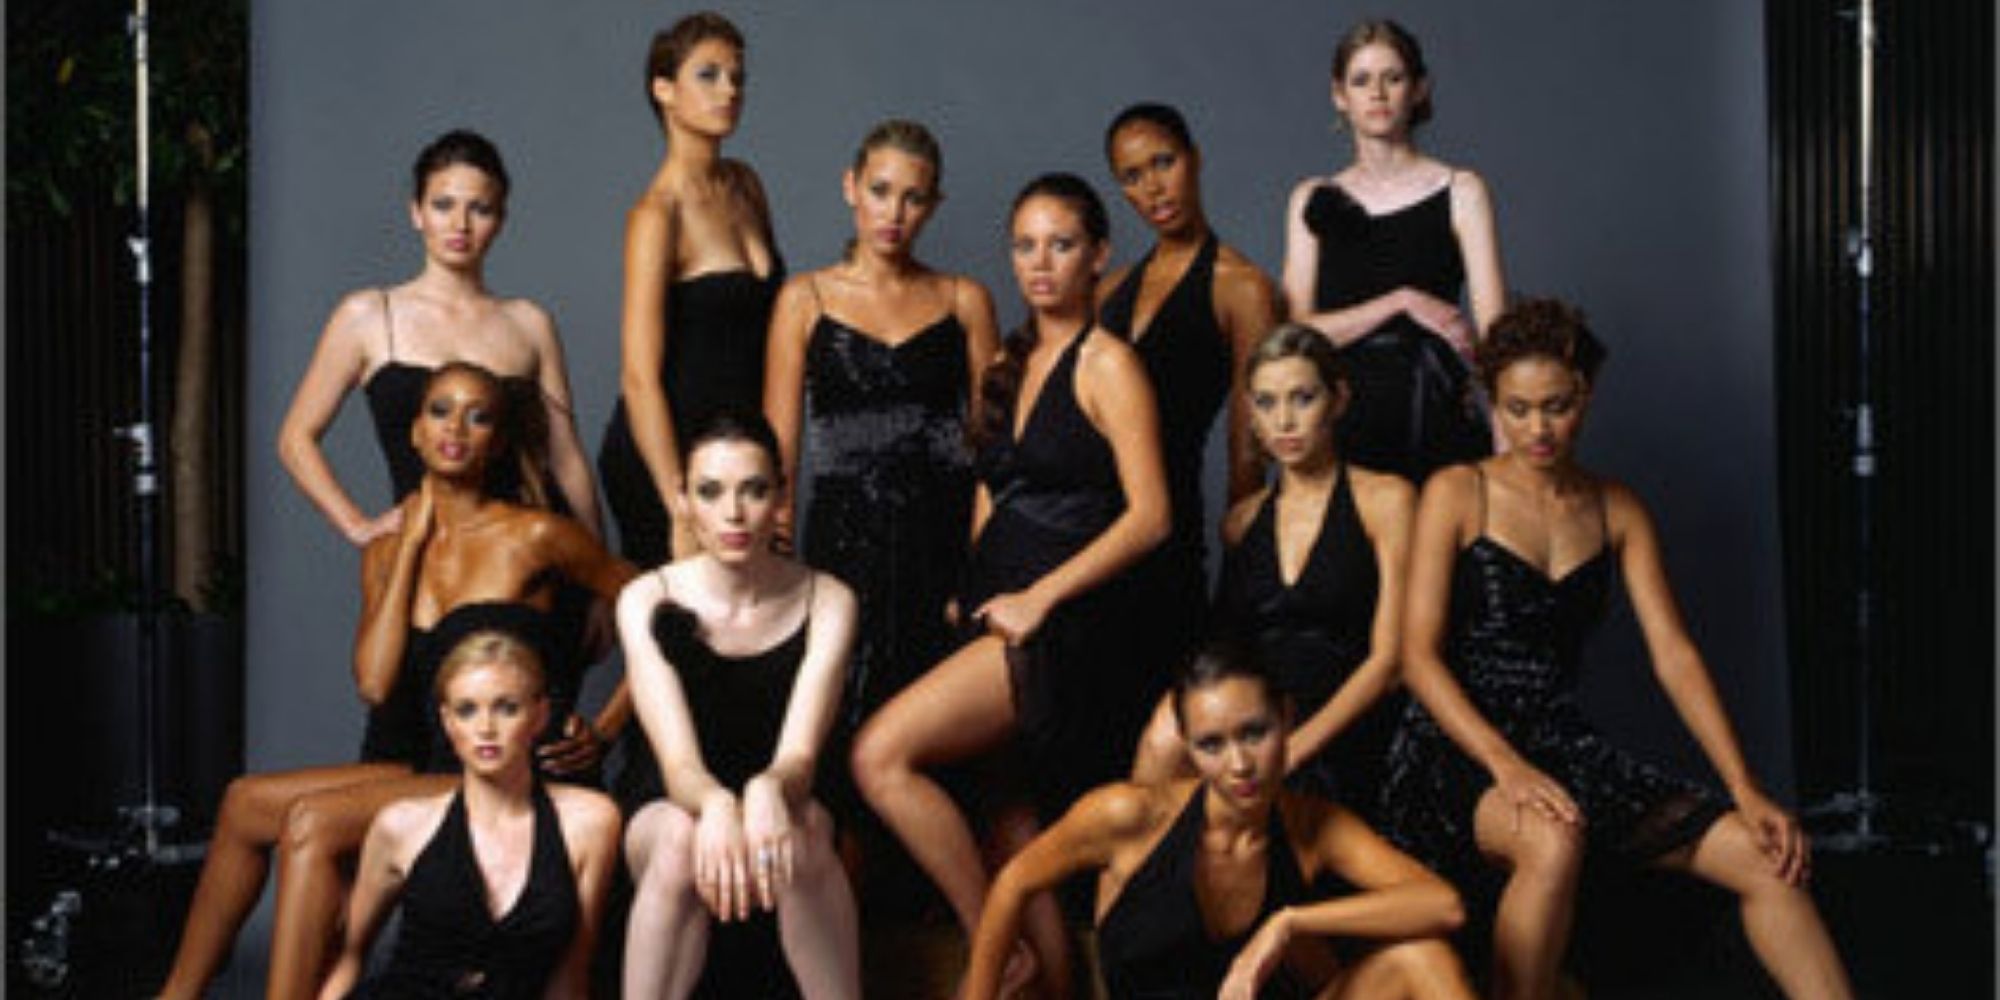 Americas Next Top Model The First 10 Seasons Ranked According To Imdb